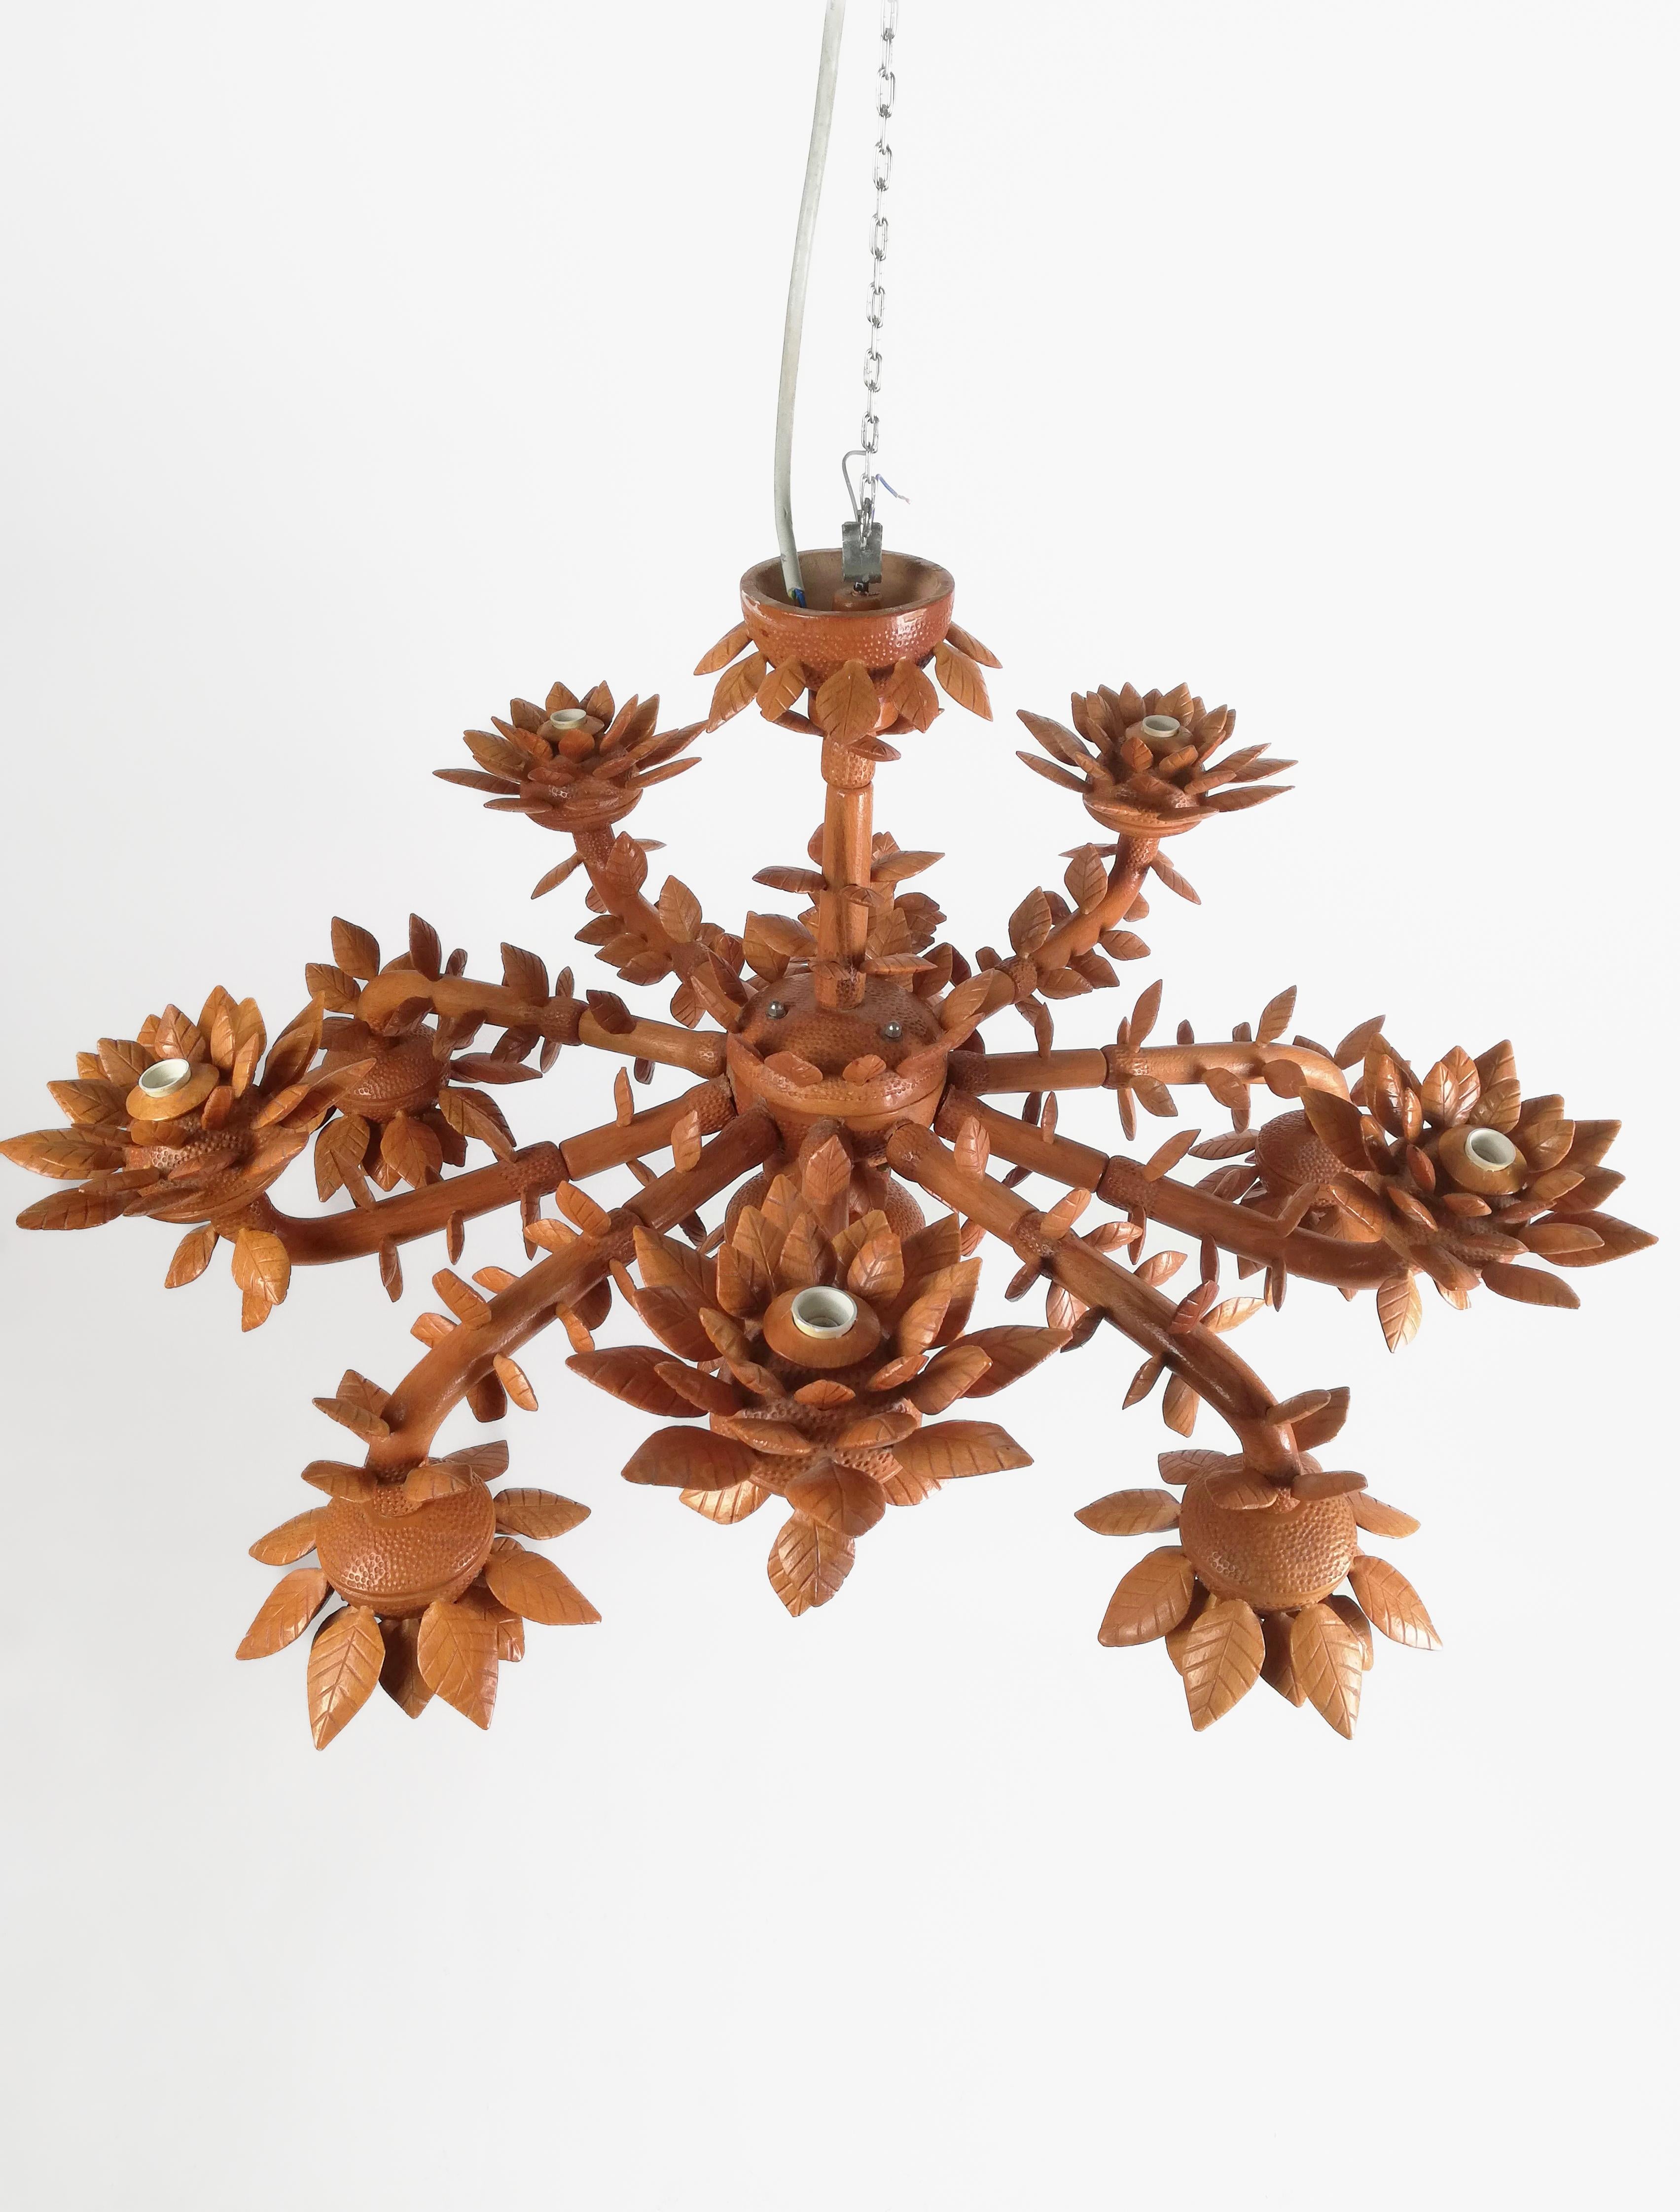 Sculptural Large Floral Chandelier in Hand Carved Solid Wood, Italy, 1970s For Sale 6